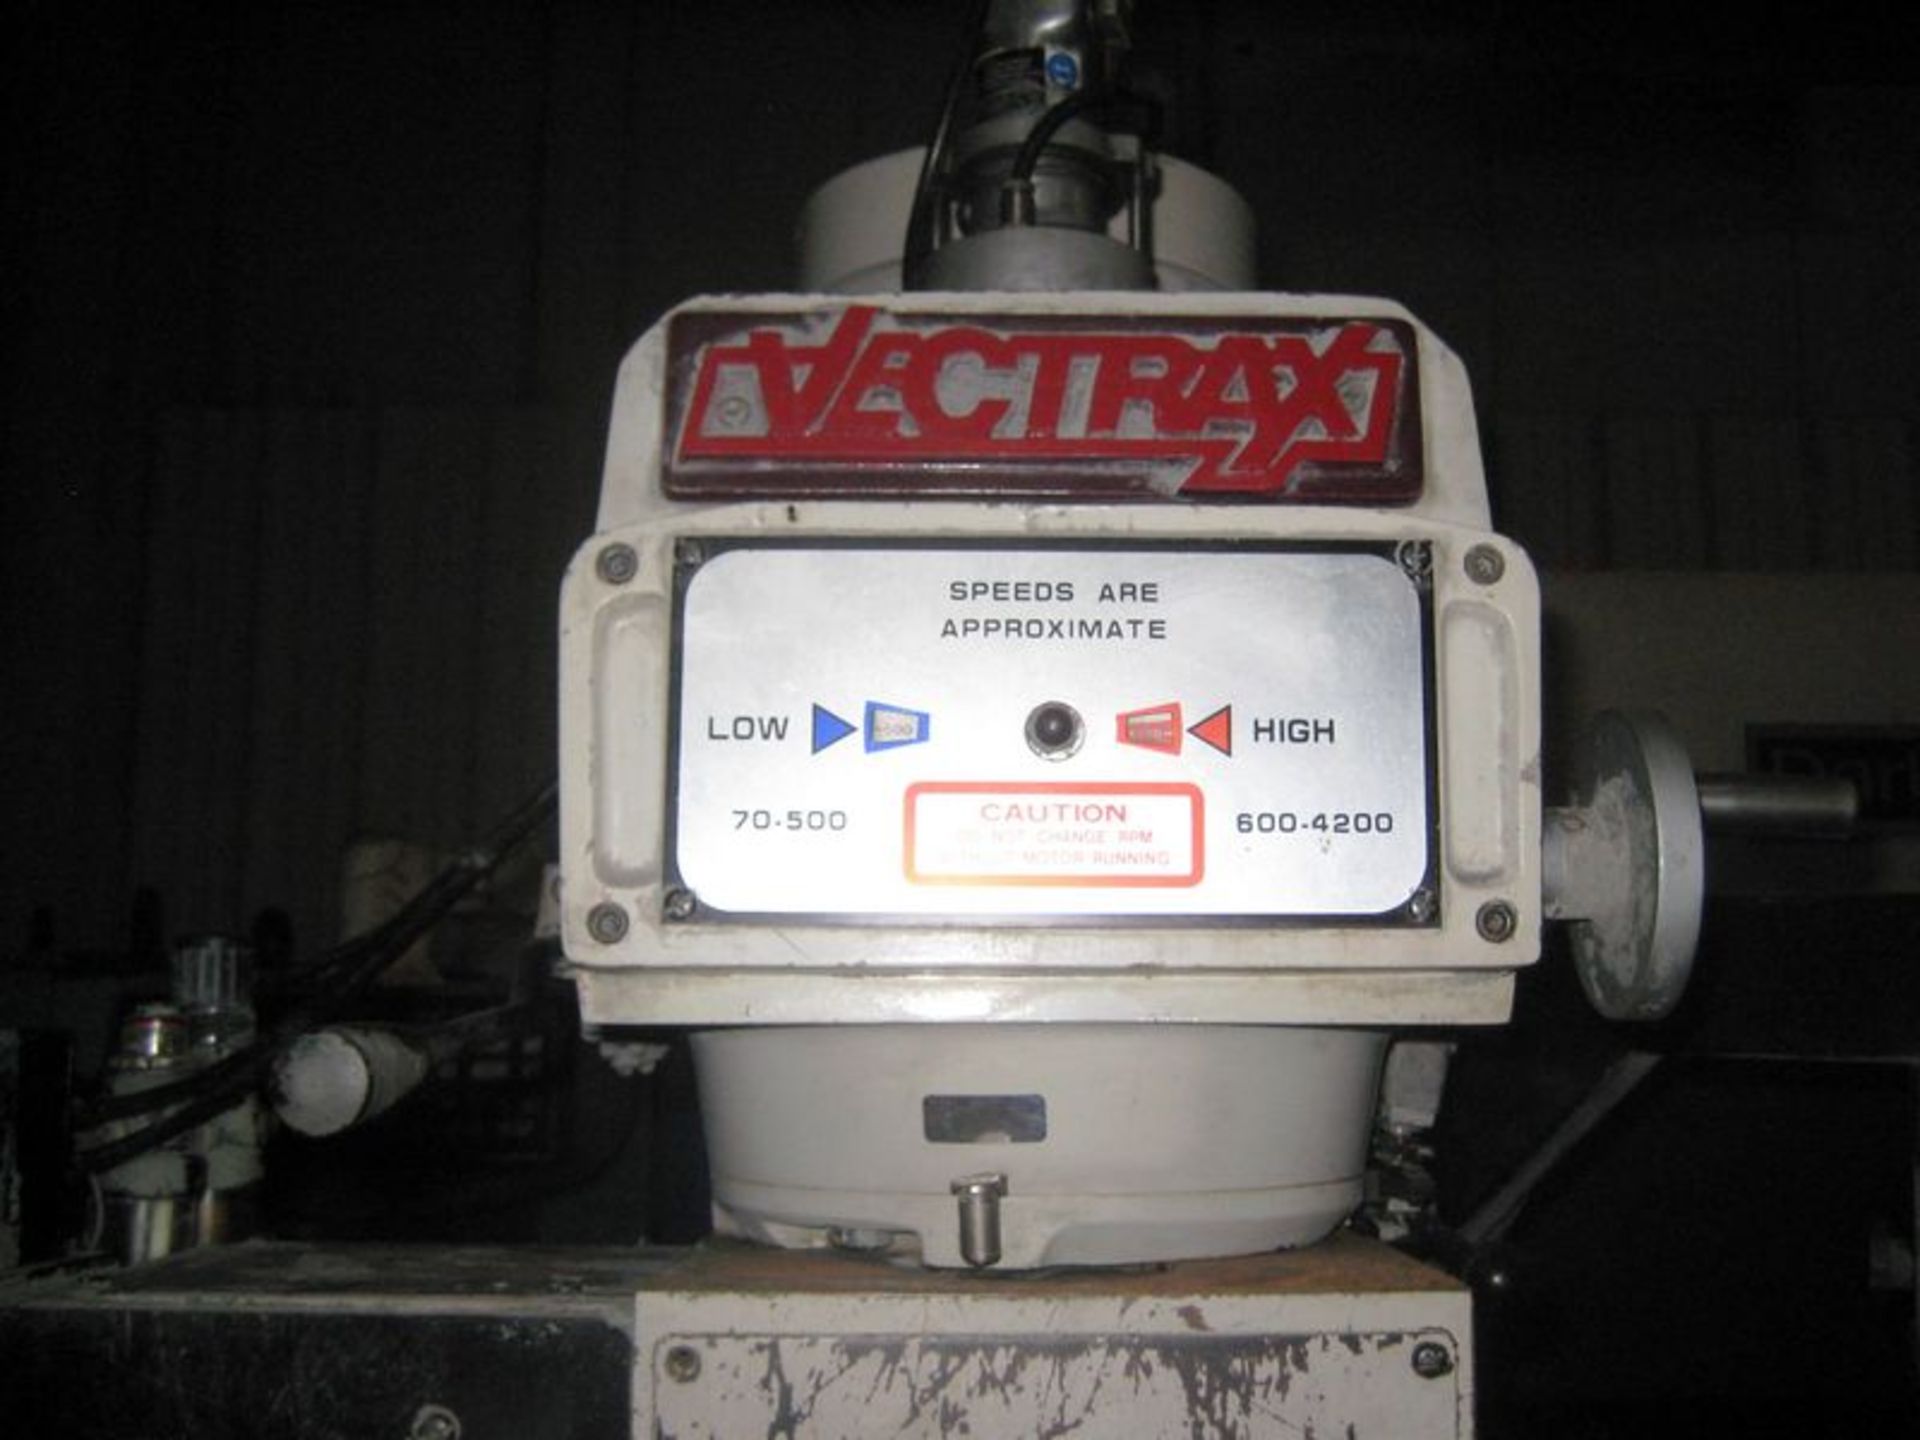 Vectrax GS-N16V 3-Axis CNC Knee Type Milling Machine, S/N 9030192NV, New 2001 - Image 3 of 5